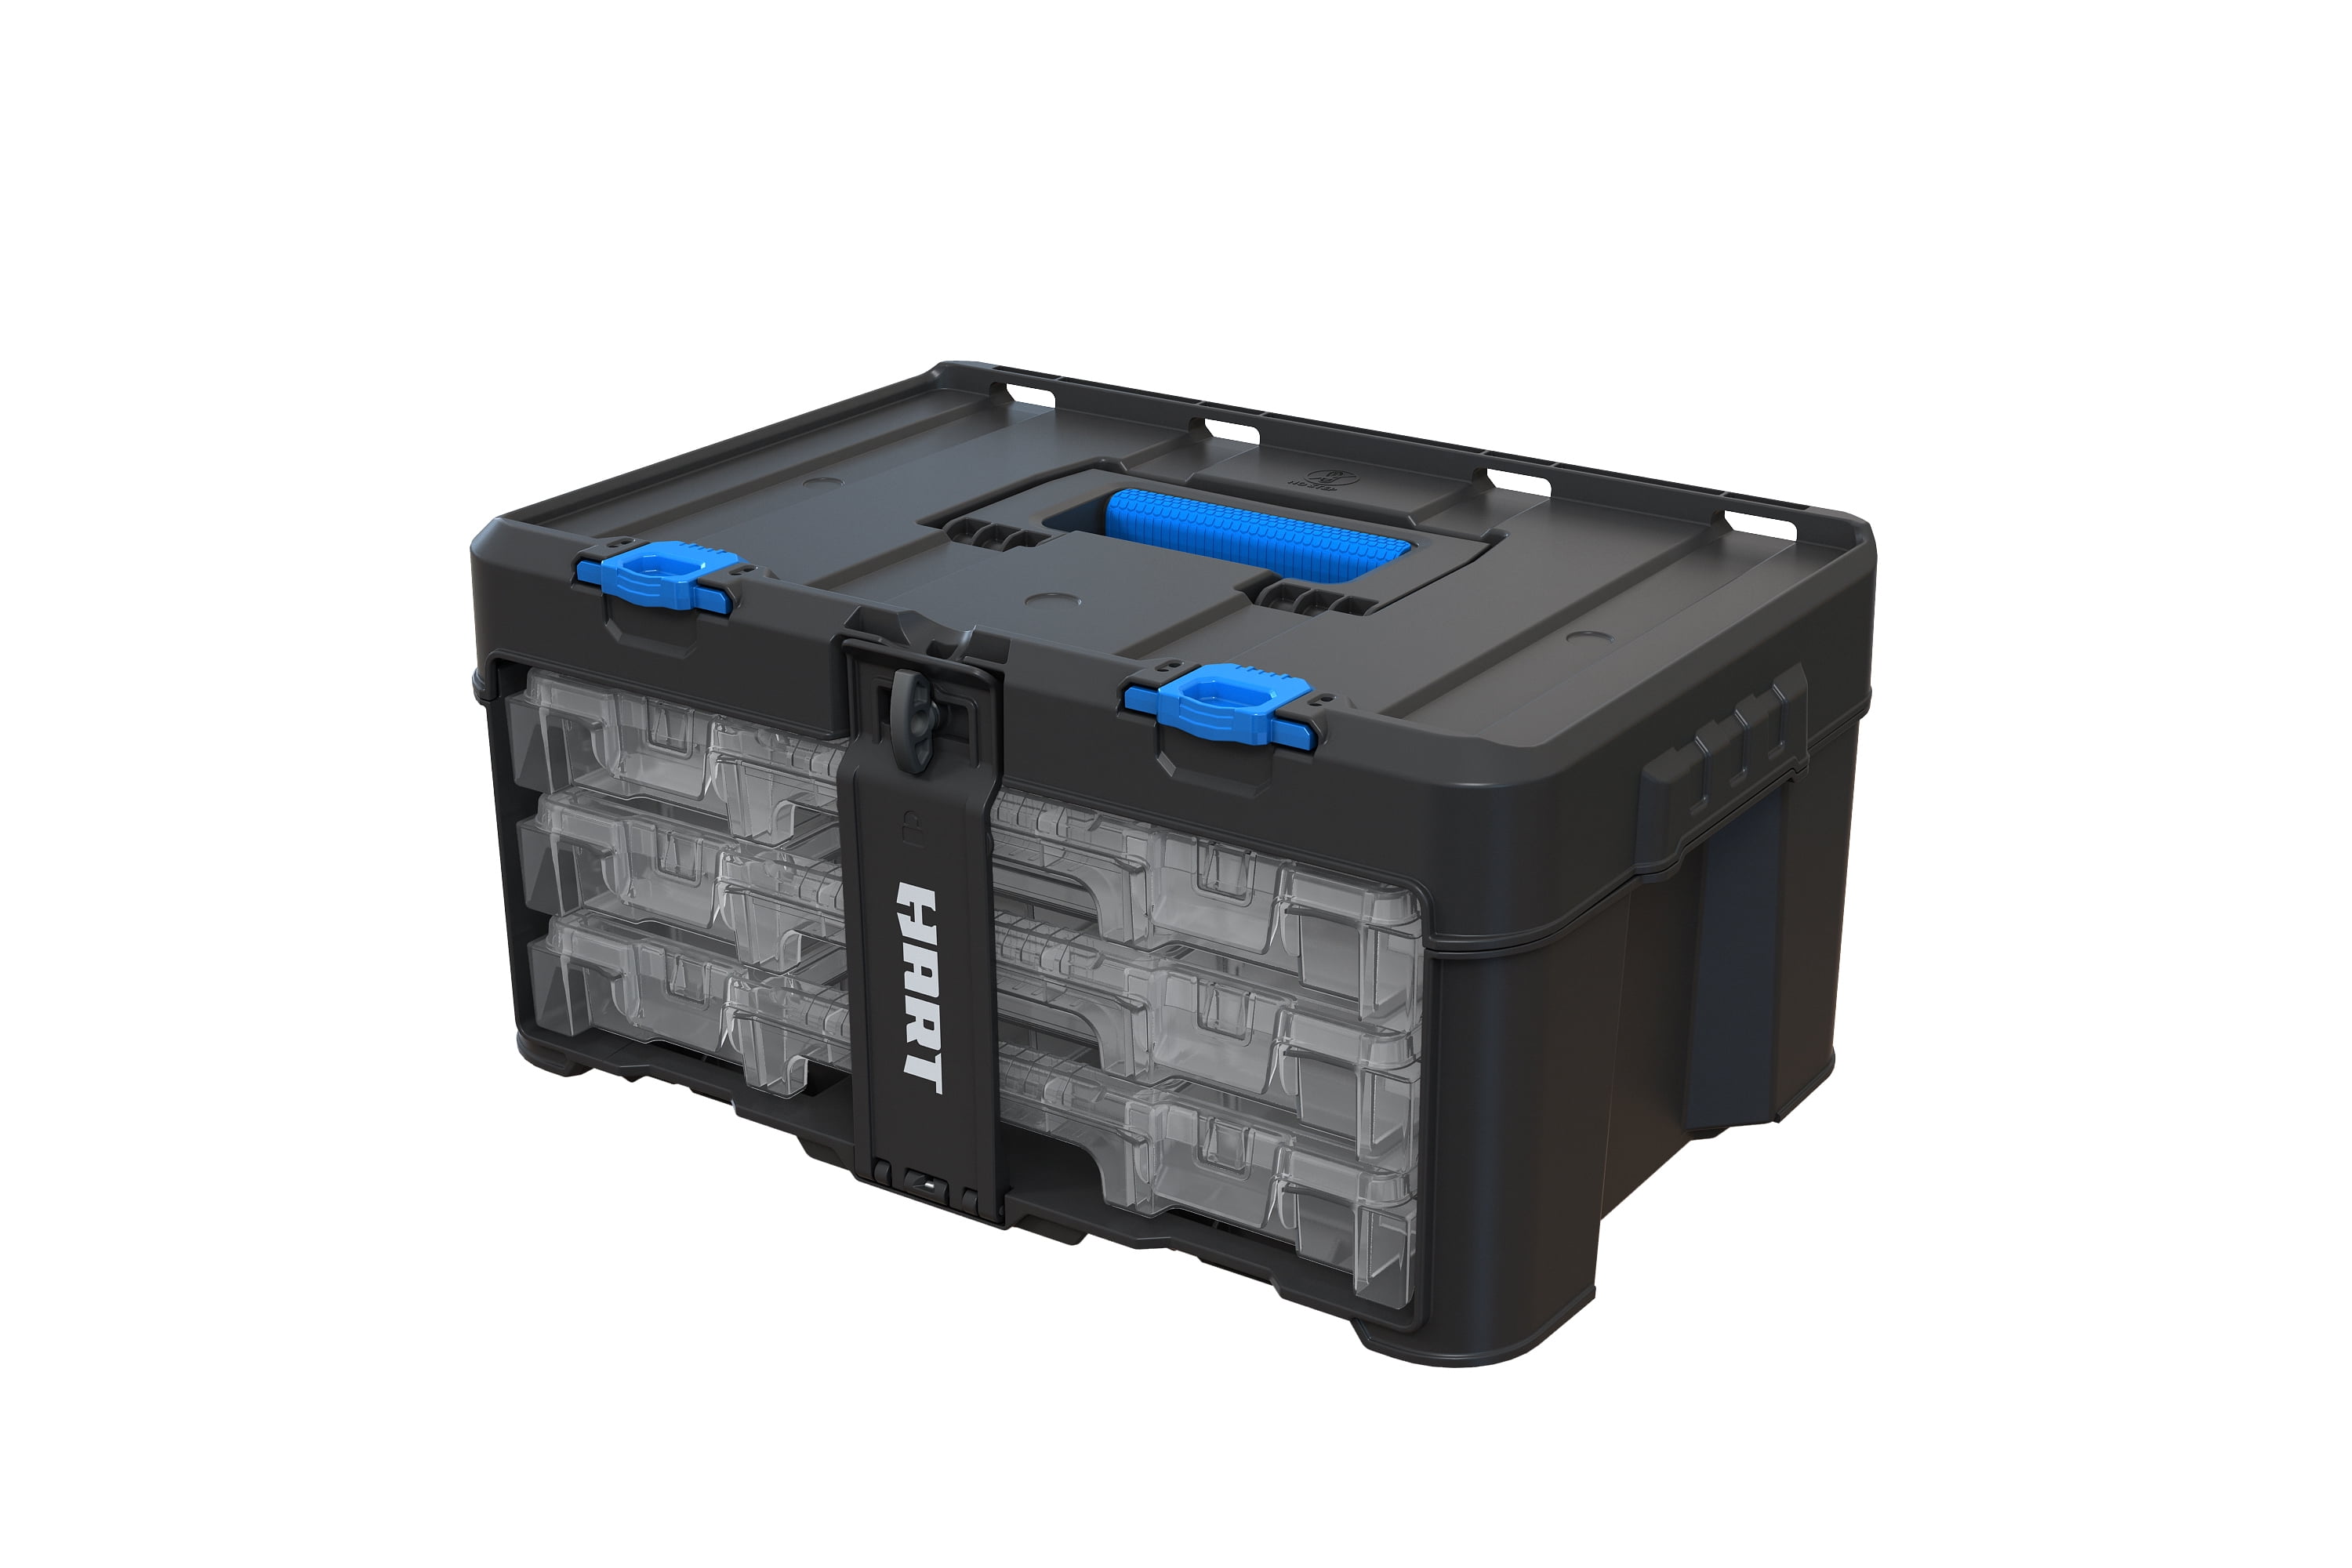 Hart Stack System 3 Case Parts and Tool Box Organizer, Fits Hart's Modular Storage System